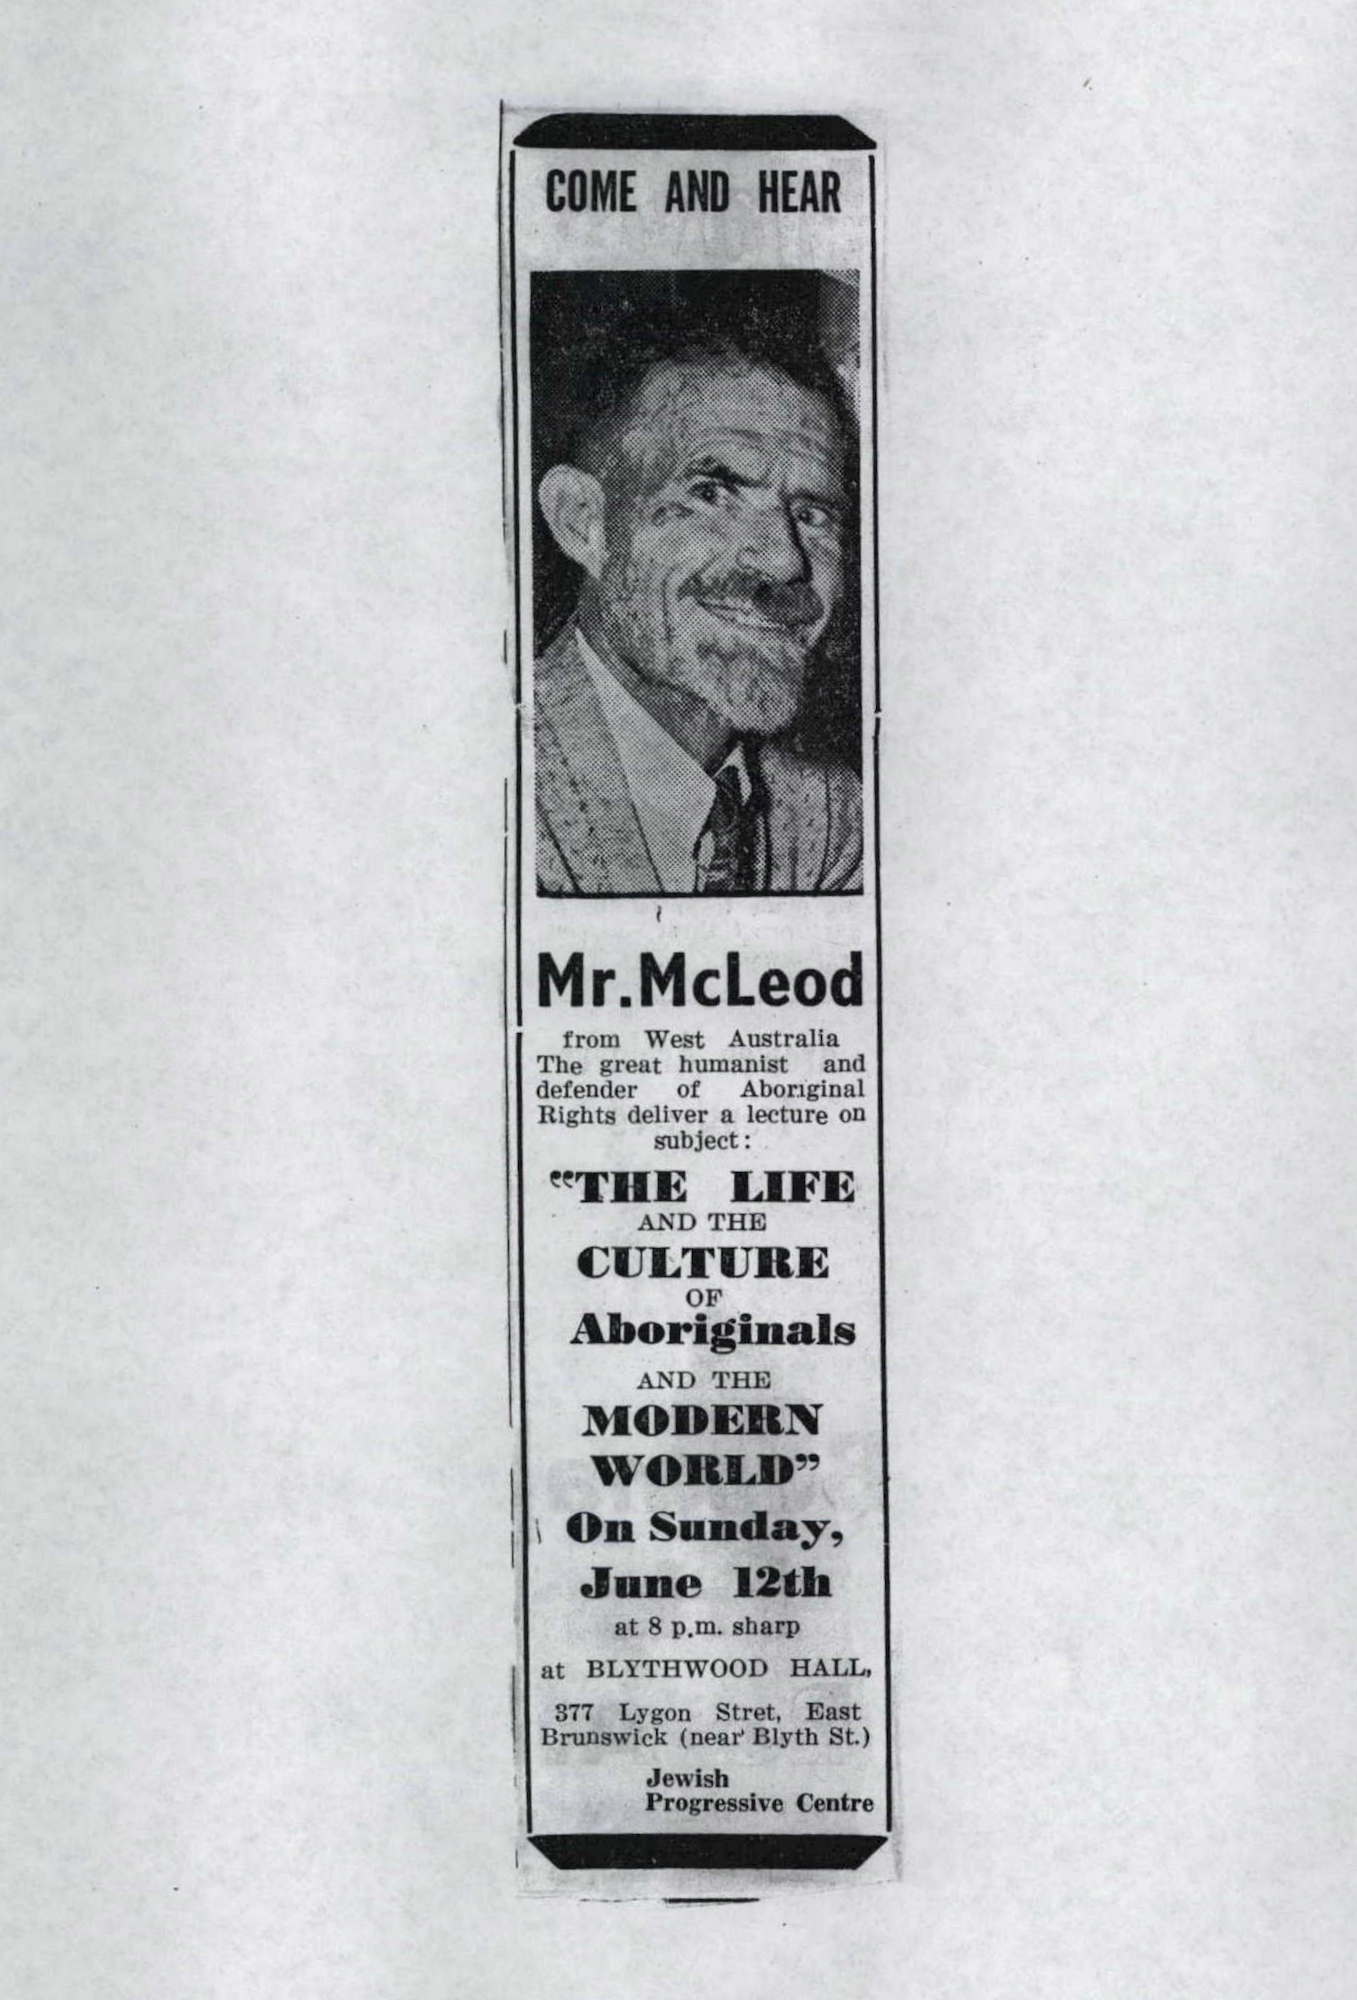 Unsourced newspaper cutting, Don McLeod ASIO, National Archives of Australia